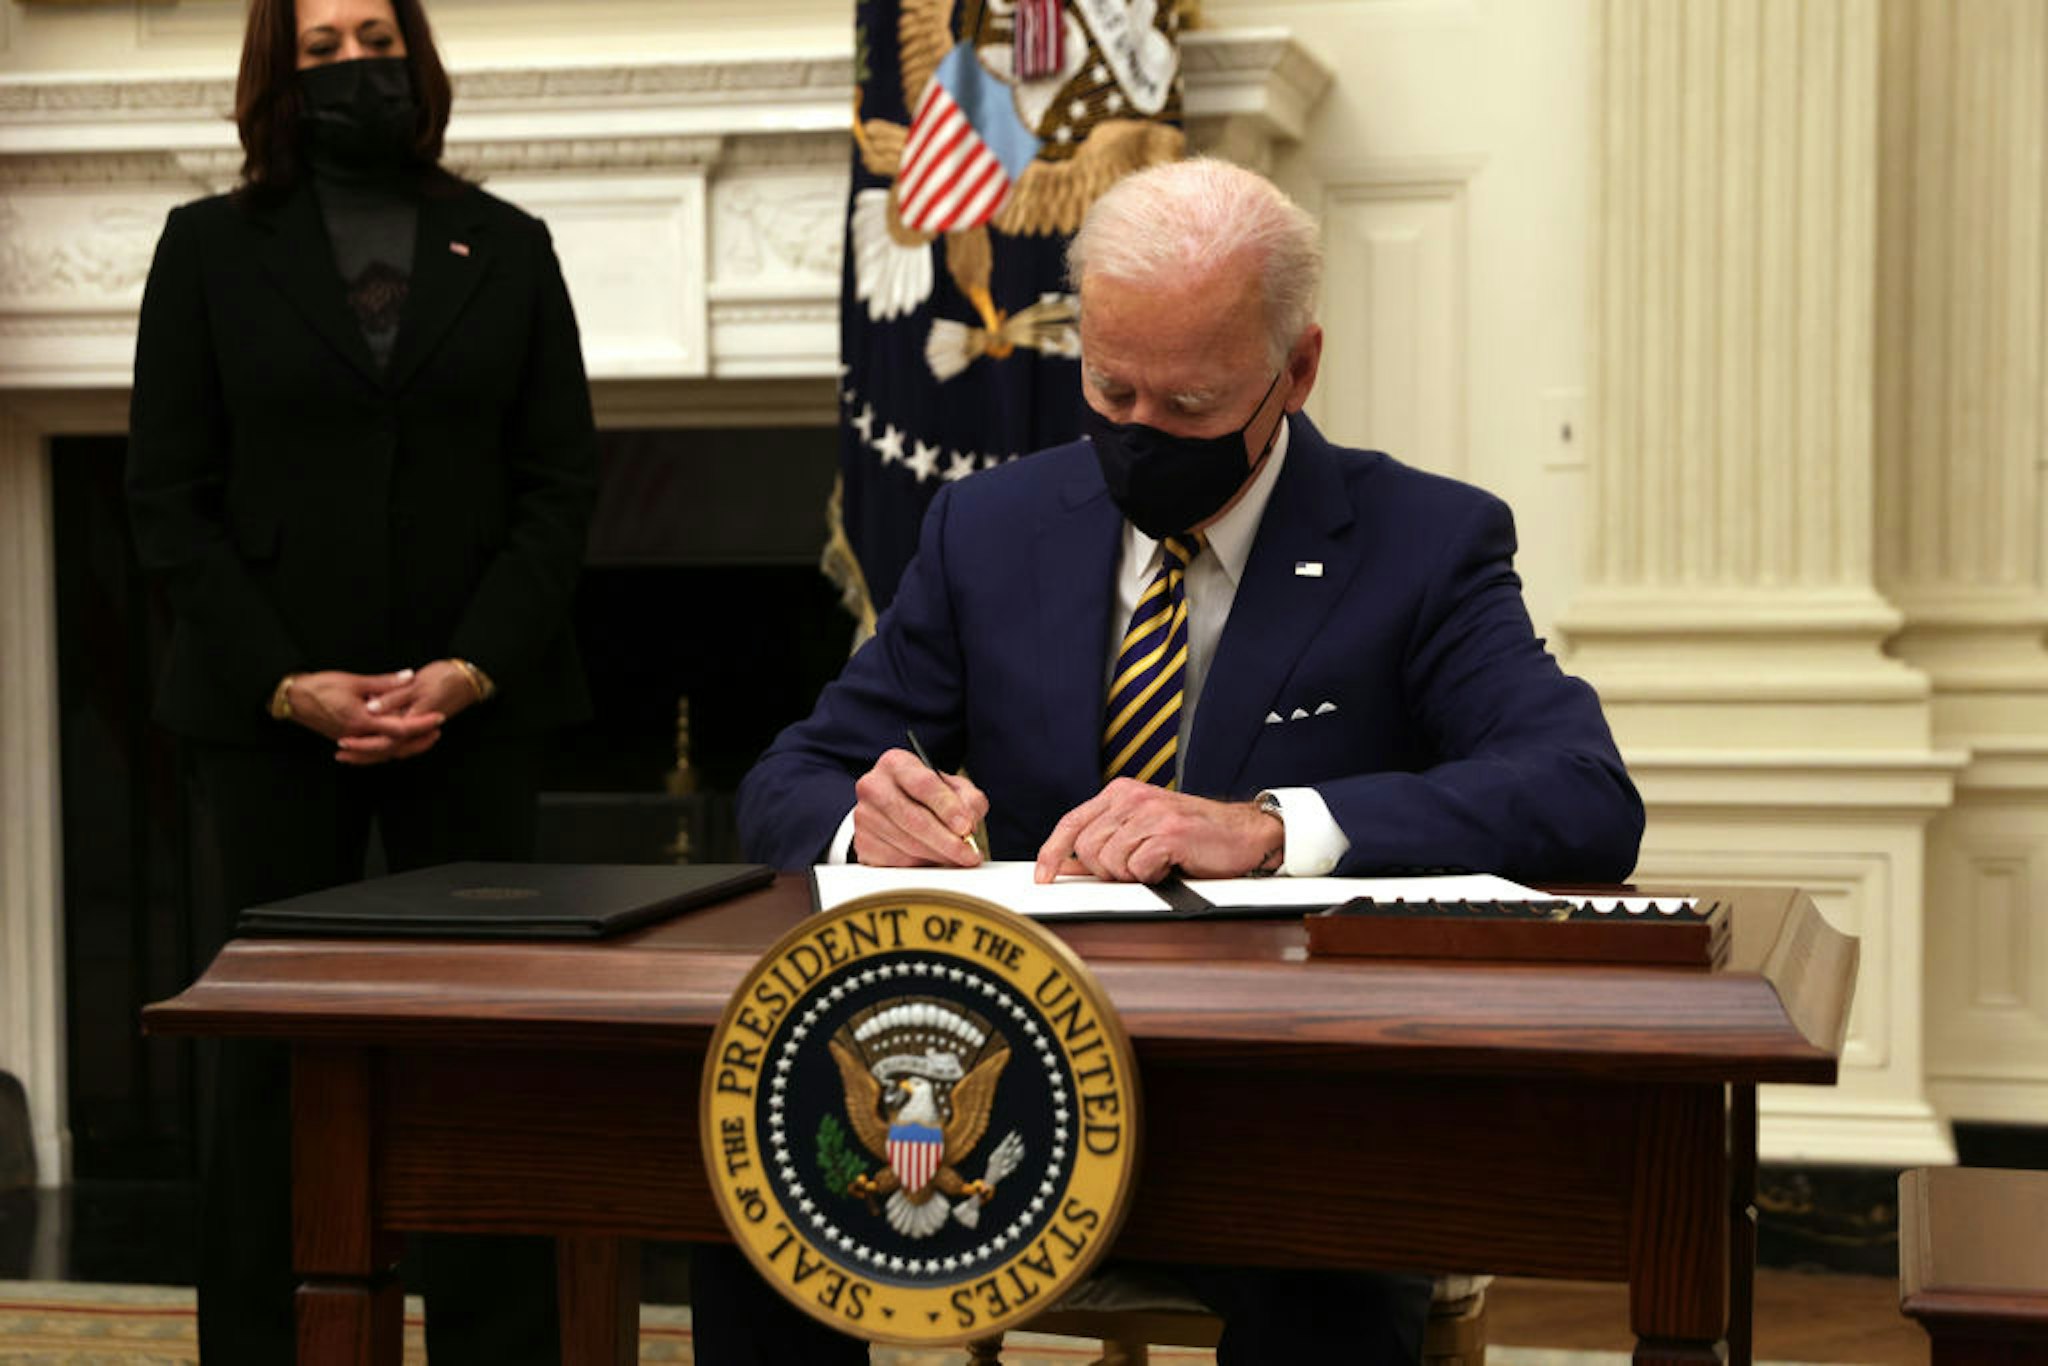 U.S. President Joe Biden signs an executive order as Vice President Kamala Harris looks on during an event on economic crisis in the State Dining Room of the White House January 22, 2021 in Washington, DC.